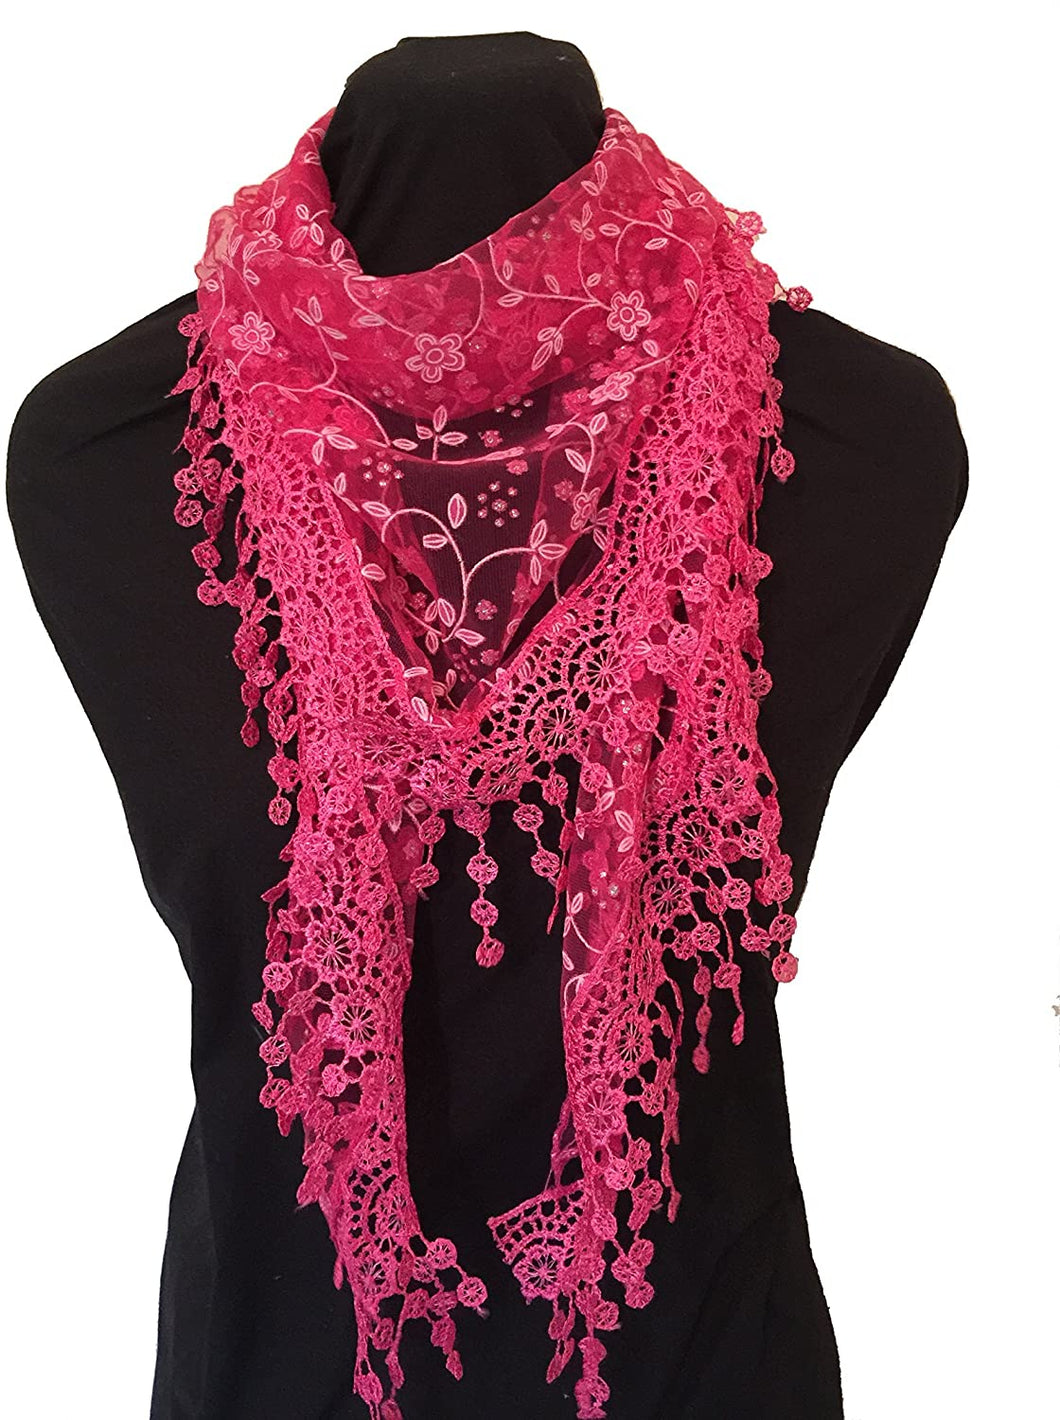 Pamper Yourself Now Fuschia Pink with White Glittery Flower lace Triangle Scarf with lace Trim